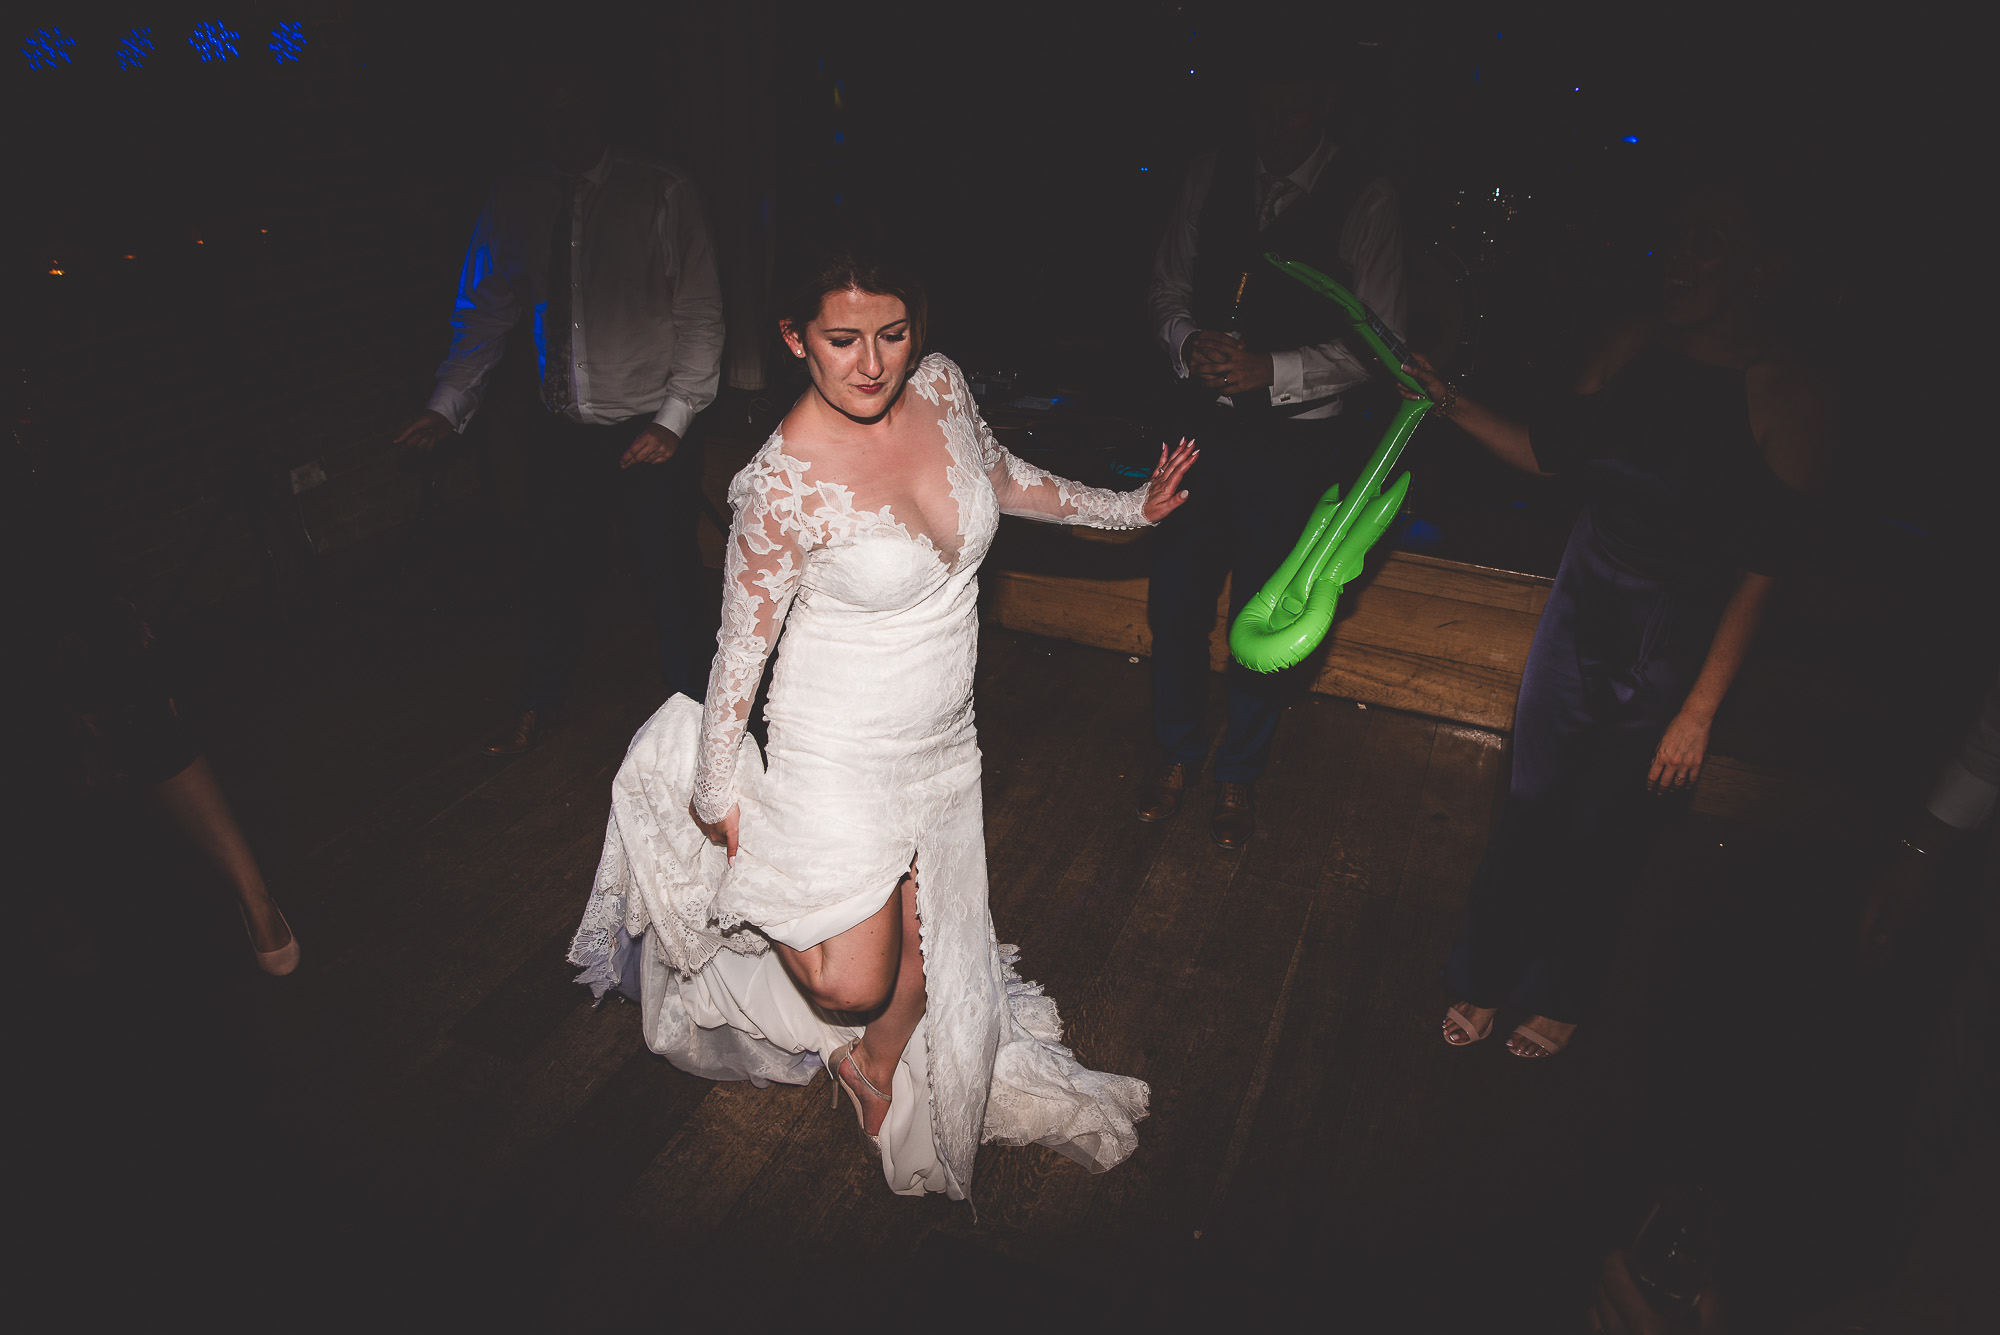 A bride in a wedding dress dancing with a green sock captured by the wedding photographer.